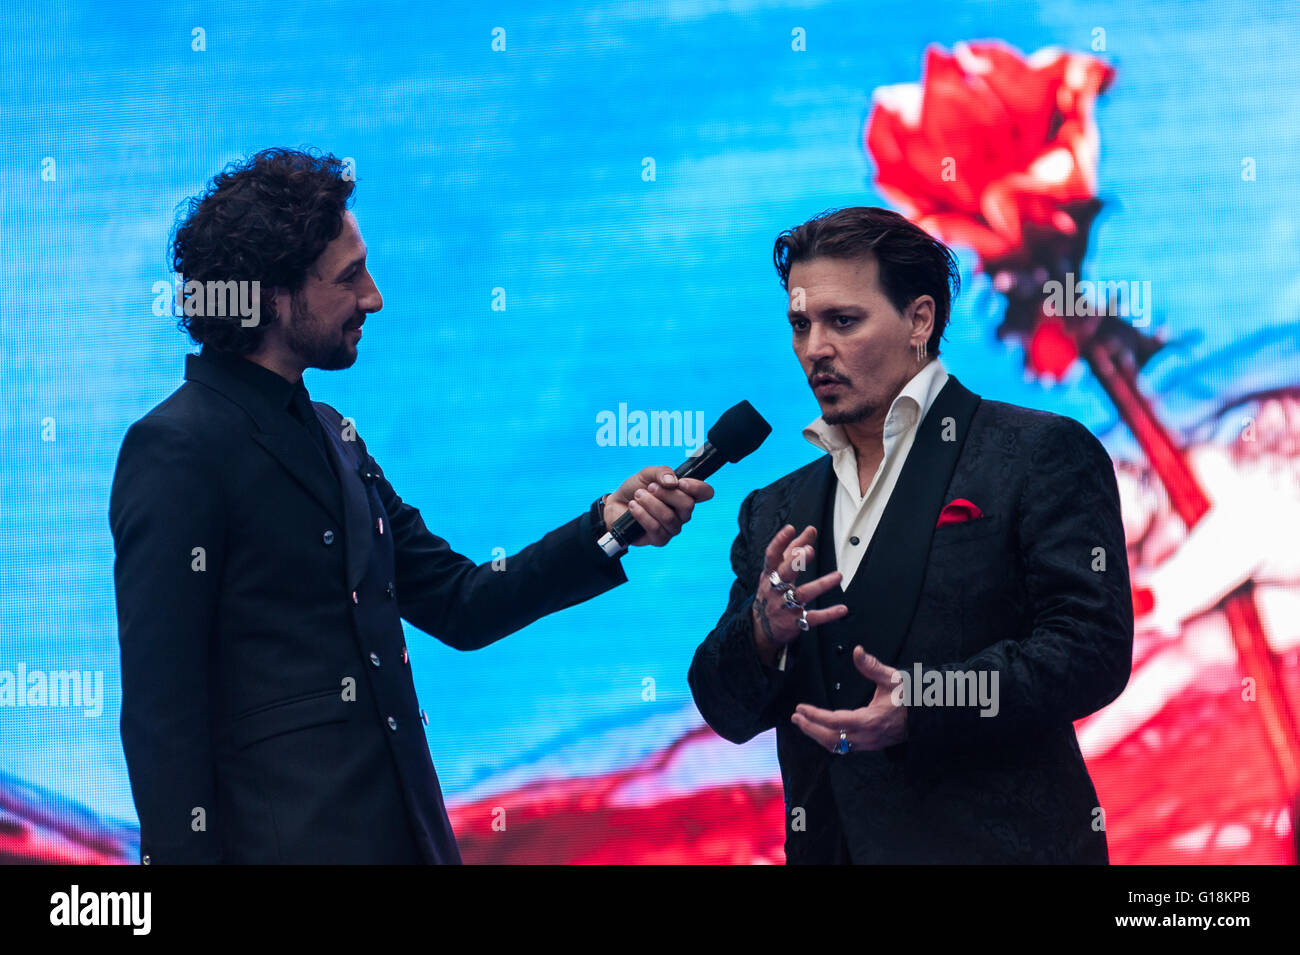 London, UK. 10th May 2016. Johnny Depp on the stage during the European movie premiere of 'Alice Through The Looking Glass' in London's Leicester Square. Wiktor Szymanowicz/Alamy Live News Stock Photo